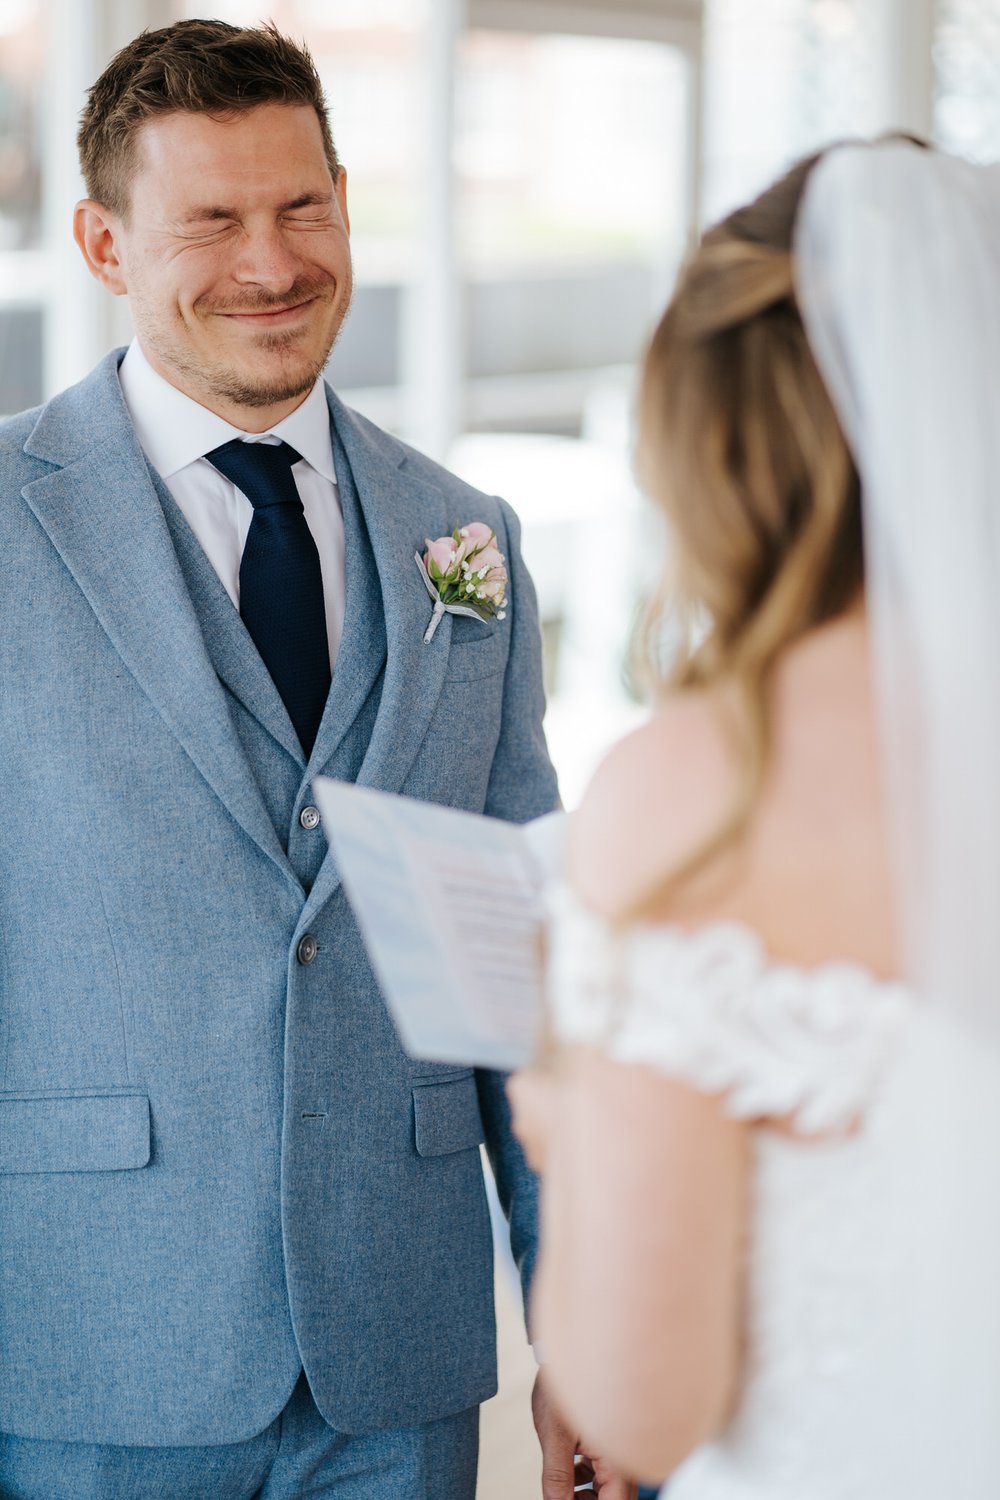 Close-up shot of the groom, squeezing his eyes in embarrassment as the bride reads her personal wedding vows during ceremony